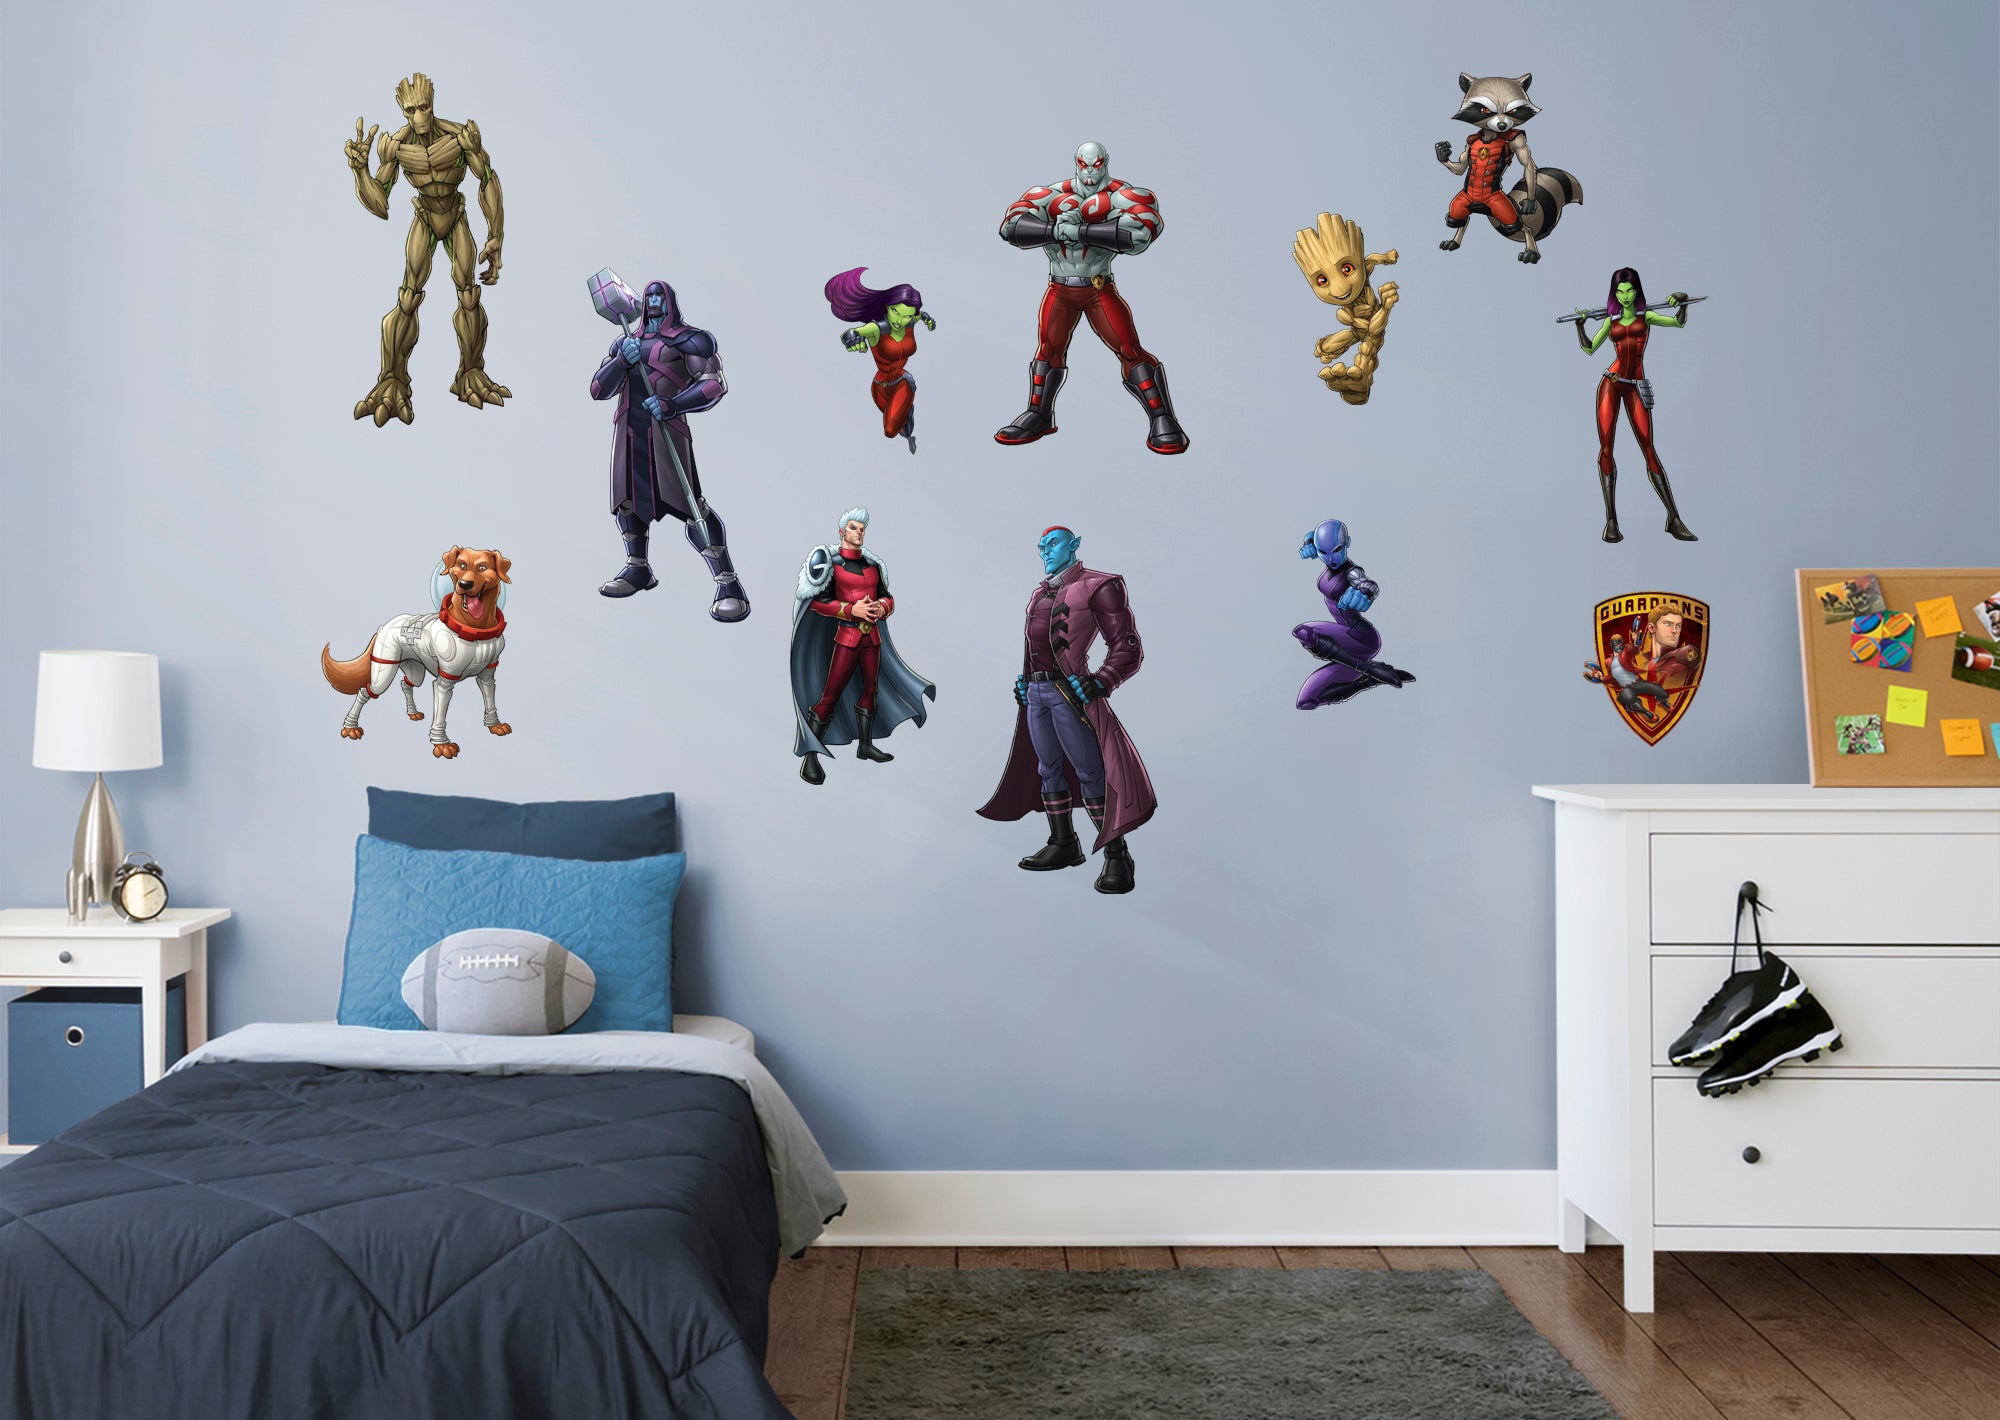 Guardians of the Galaxy Characters Collection - Officially Licensed Marvel Removable Wall Decal Collection (29"W x 14"H) by Fath